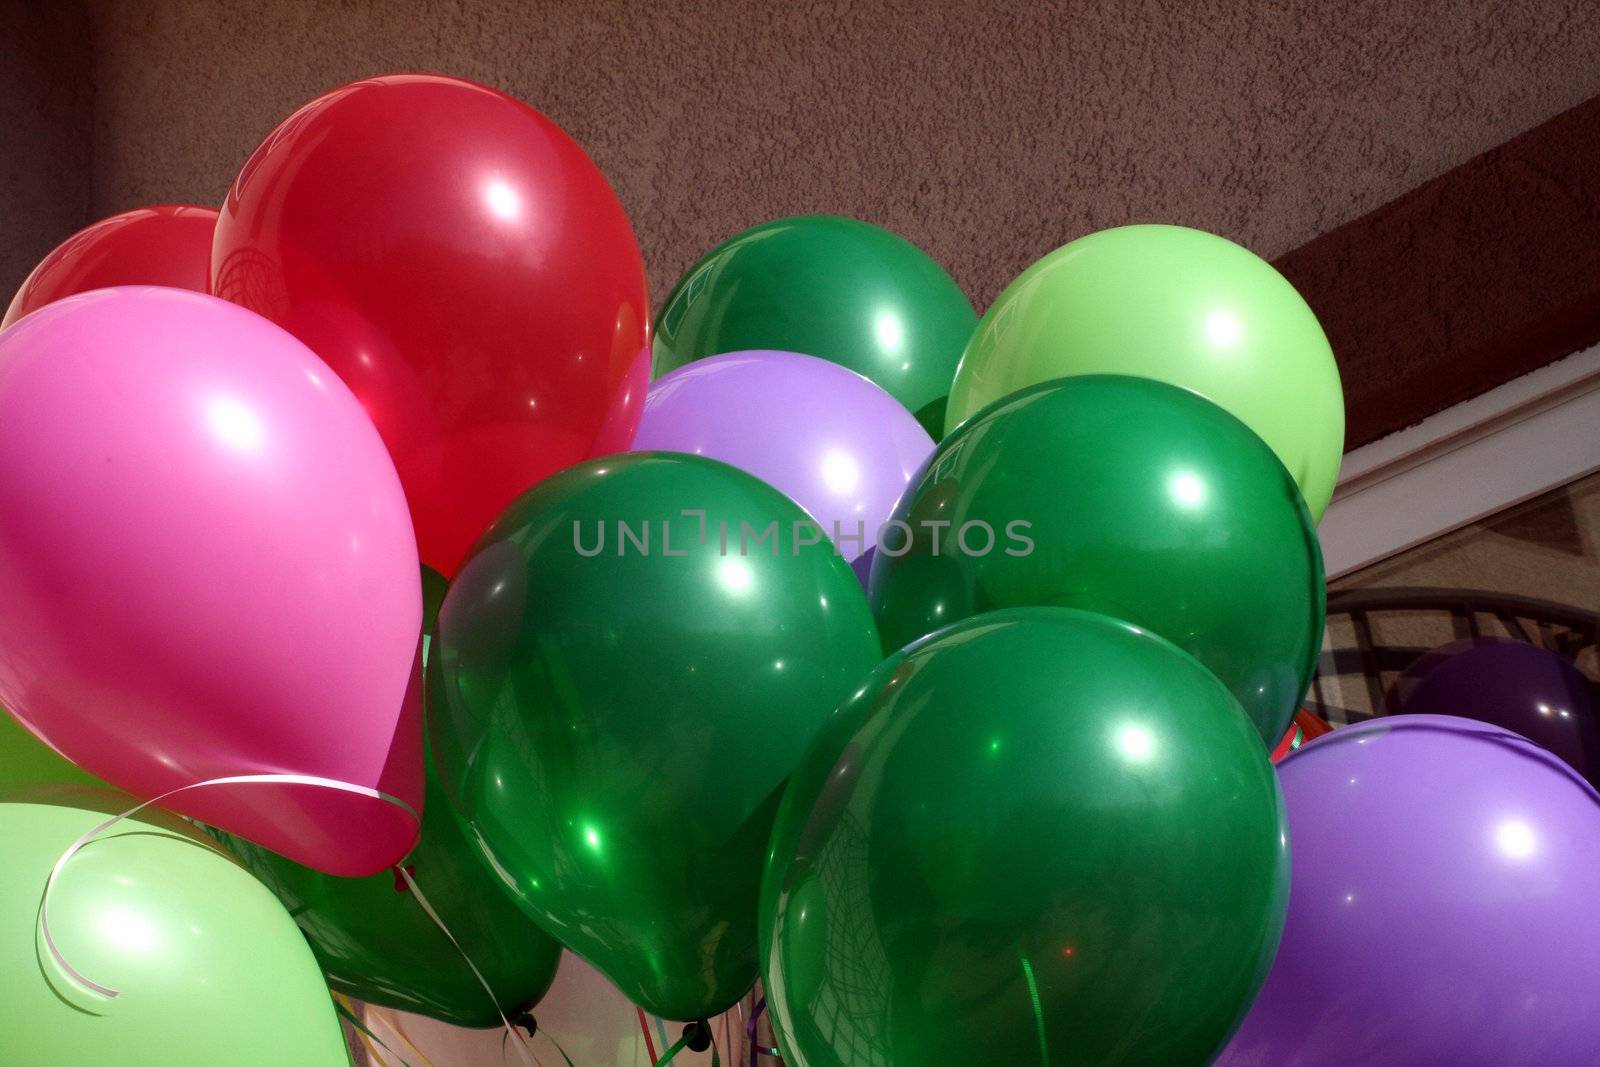 A group of colorful rubber balloons.